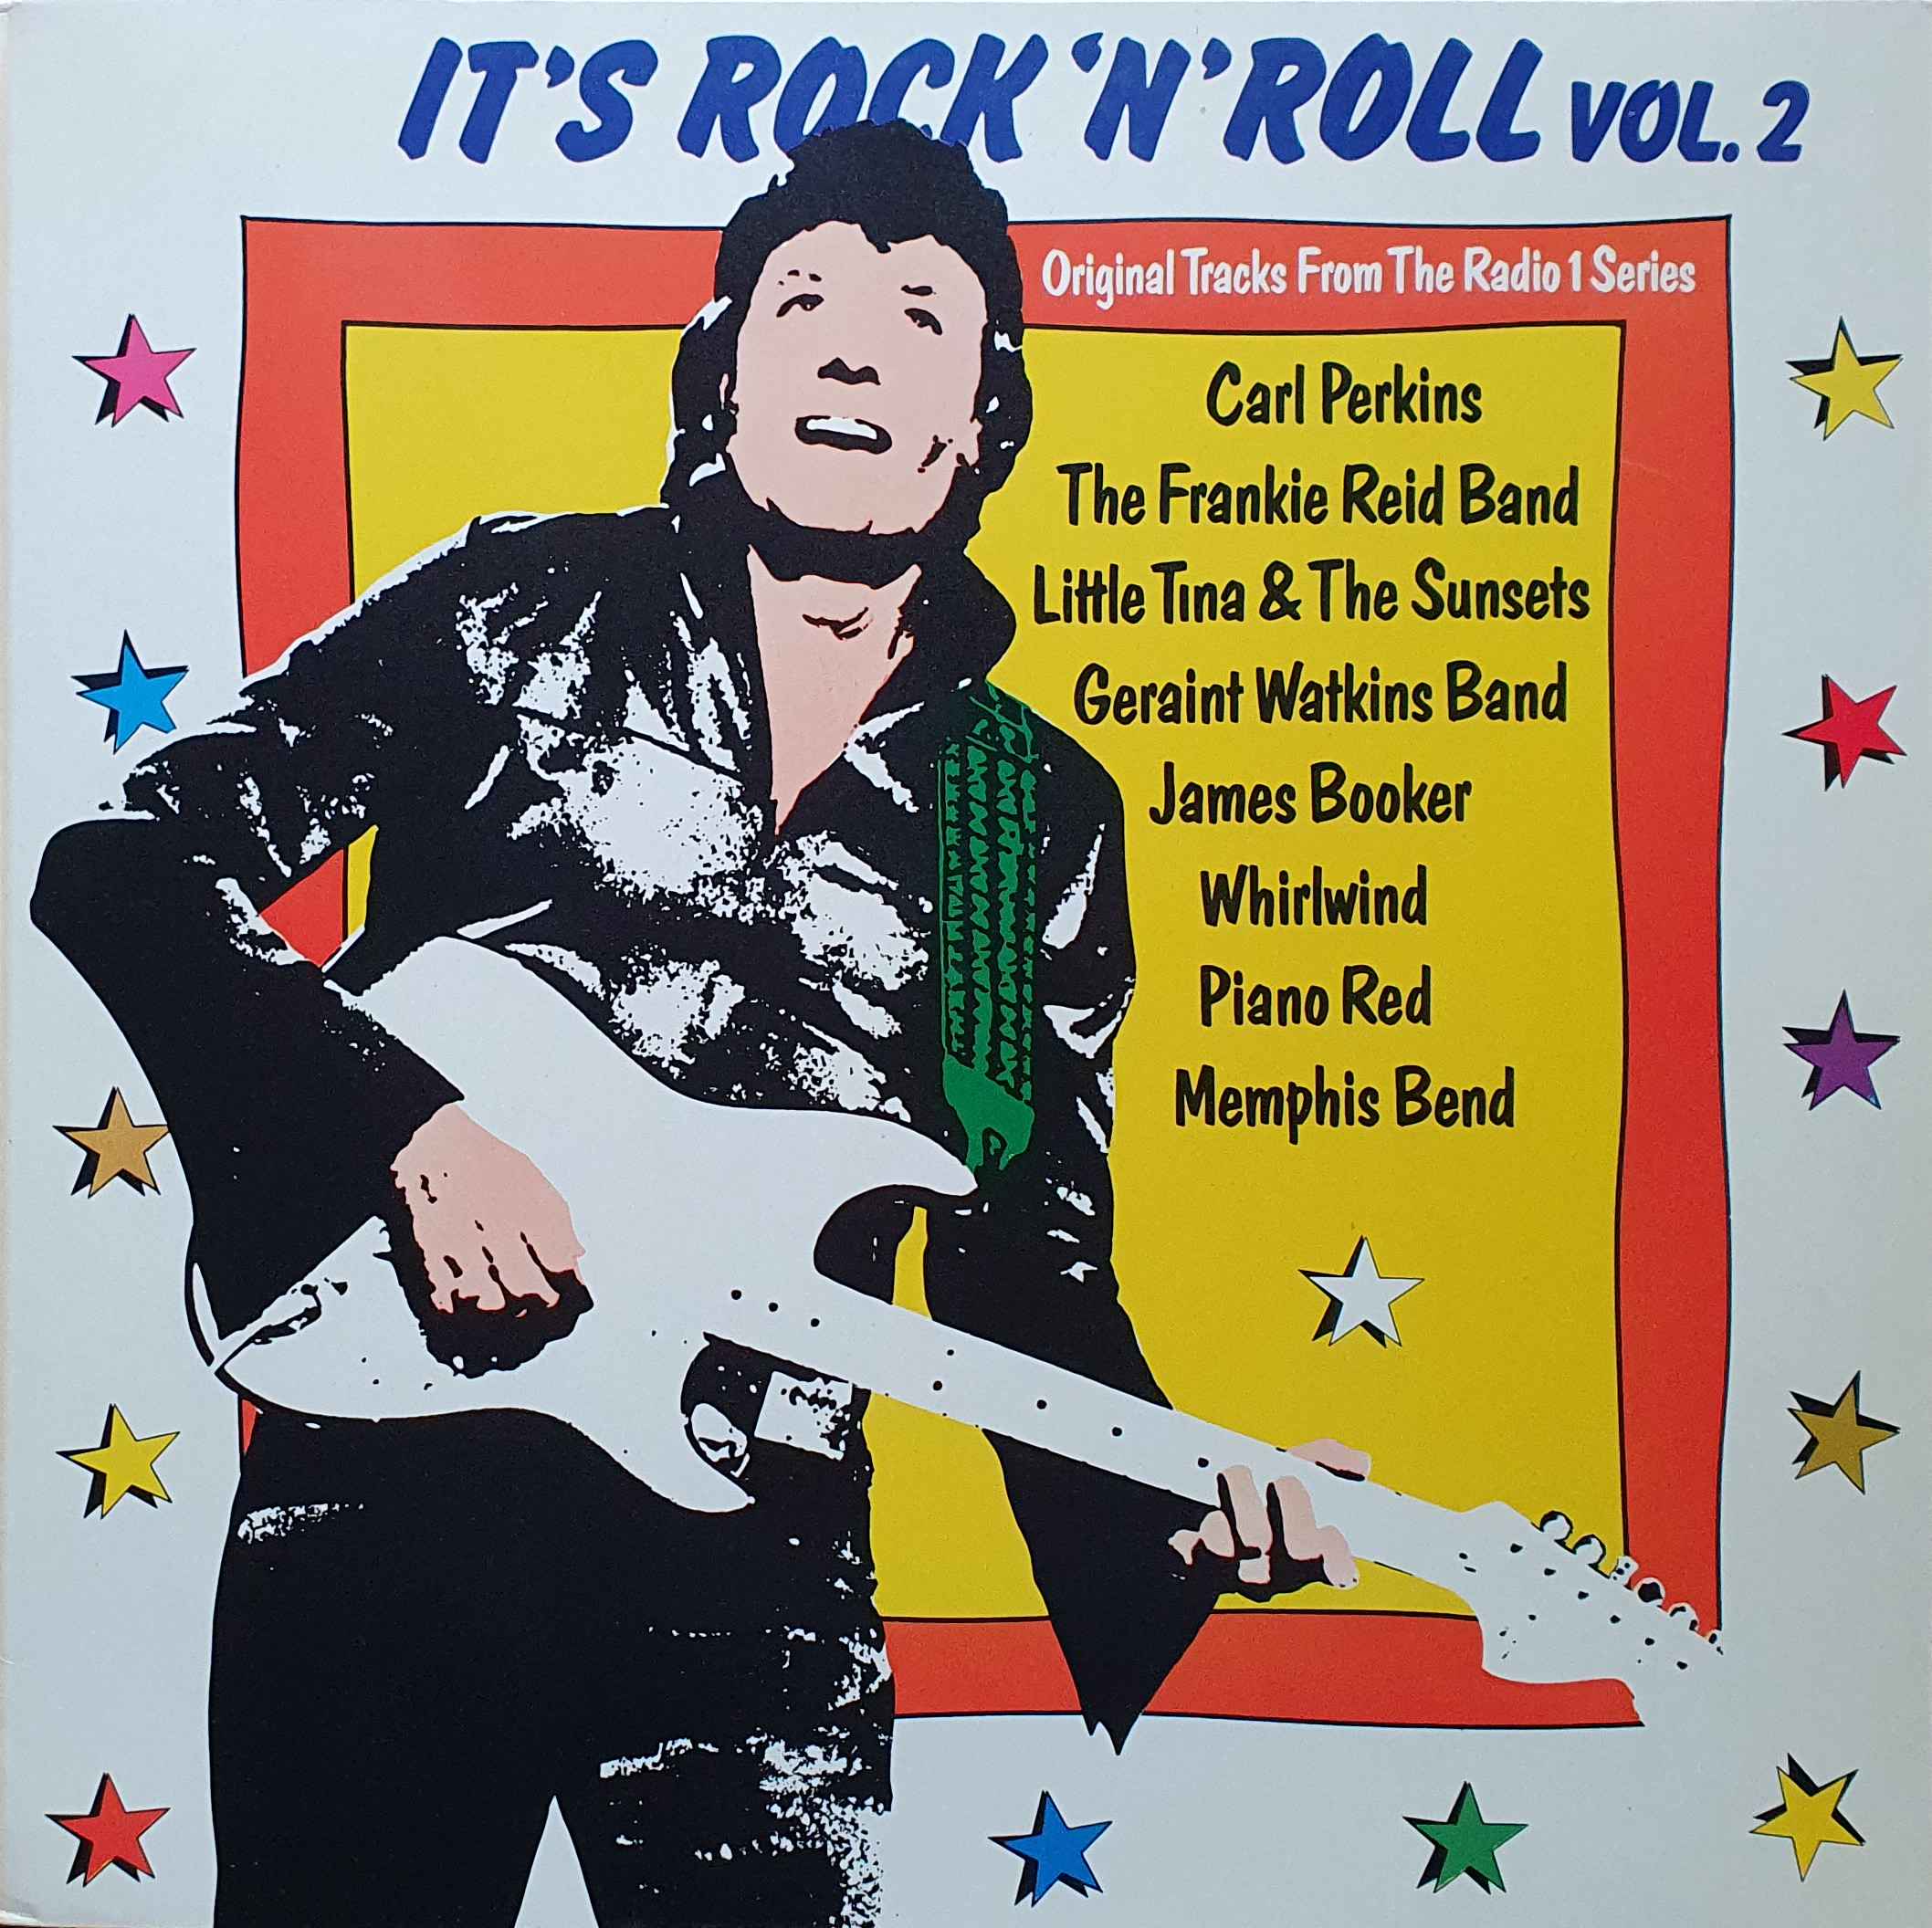 Picture of INT 128.005 It's rock 'N' roll - Volume 2 by artist Various from the BBC albums - Records and Tapes library